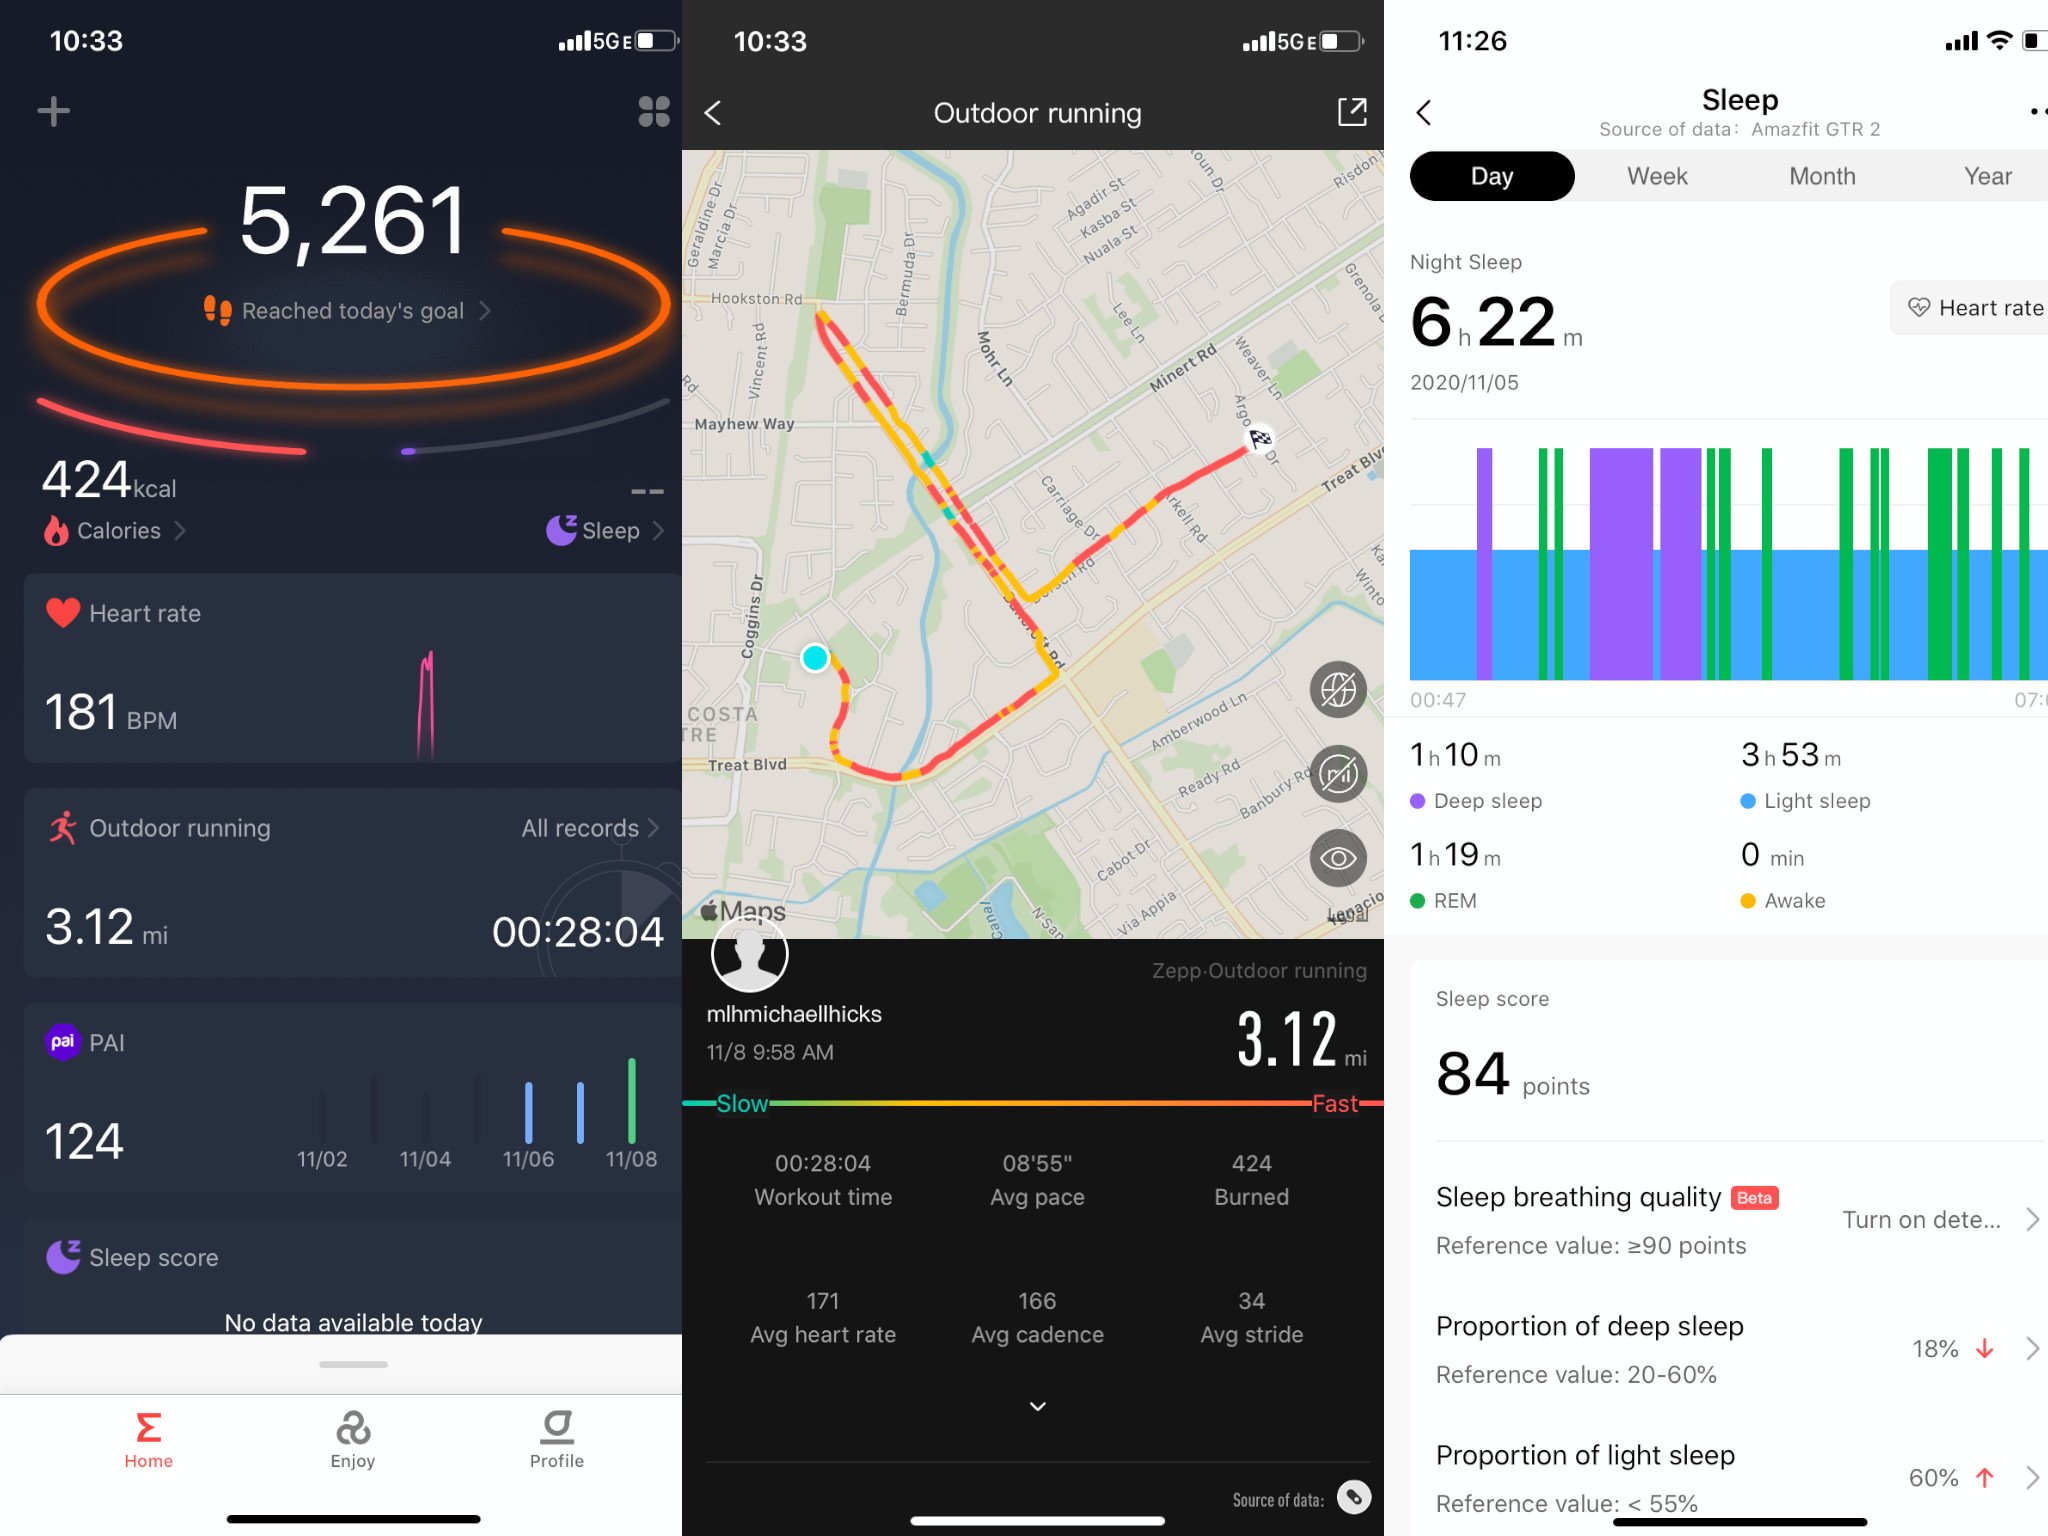 Screenshots from the Zepp app showing fitness tracking, a workout history and sleep tracking data